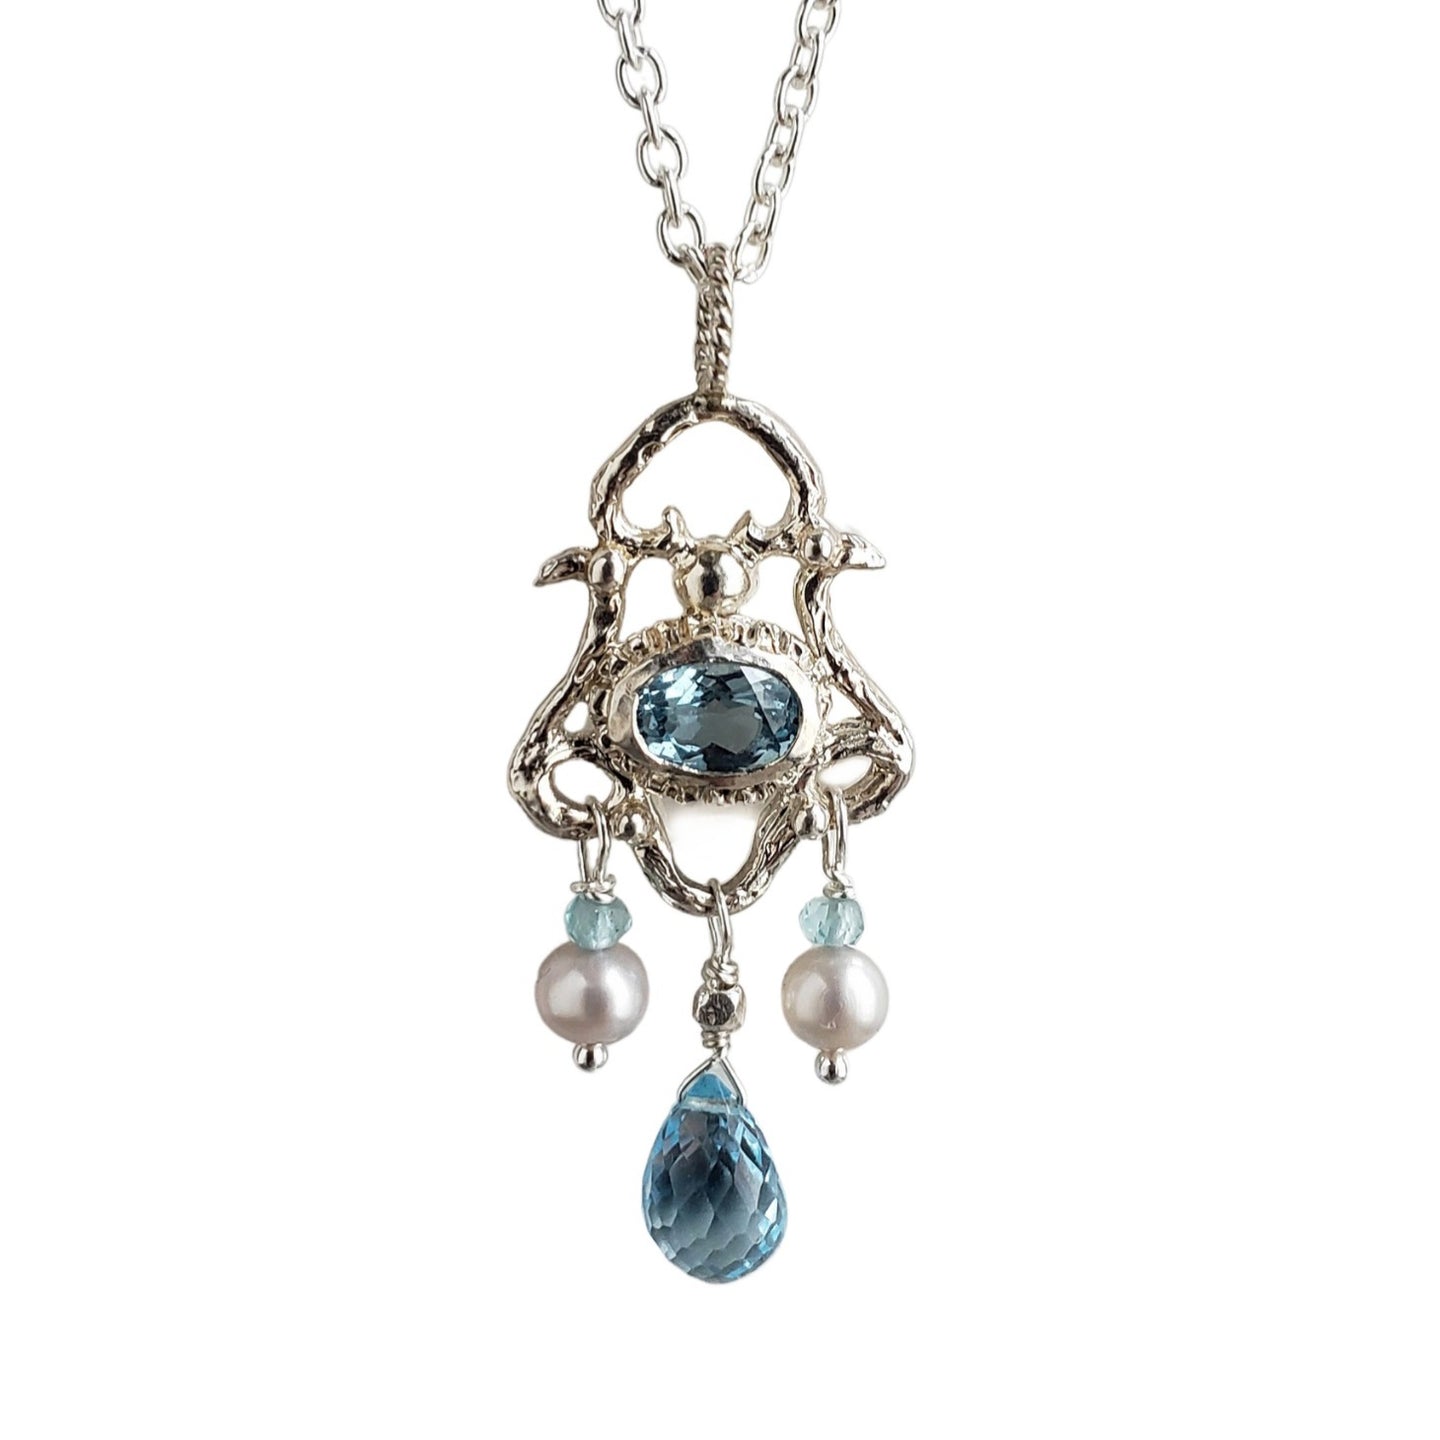 Chandelier Necklace, Blue Topaz, Pearl and Silver